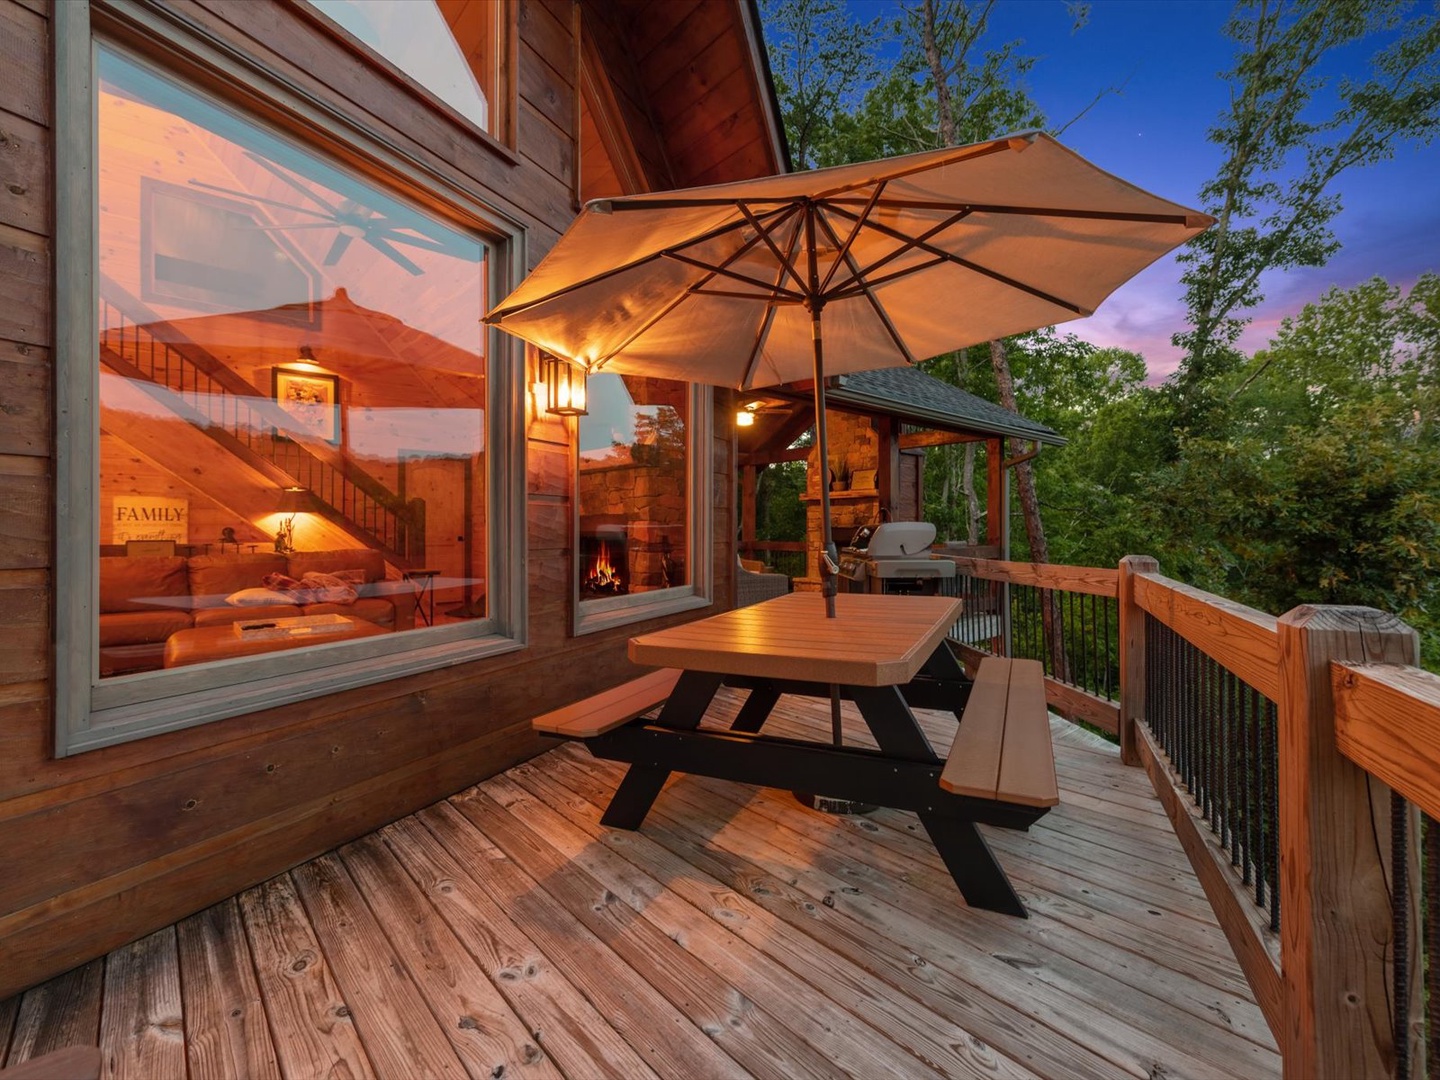 Whisky Creek Retreat- Entry deck picnic table with mountain views